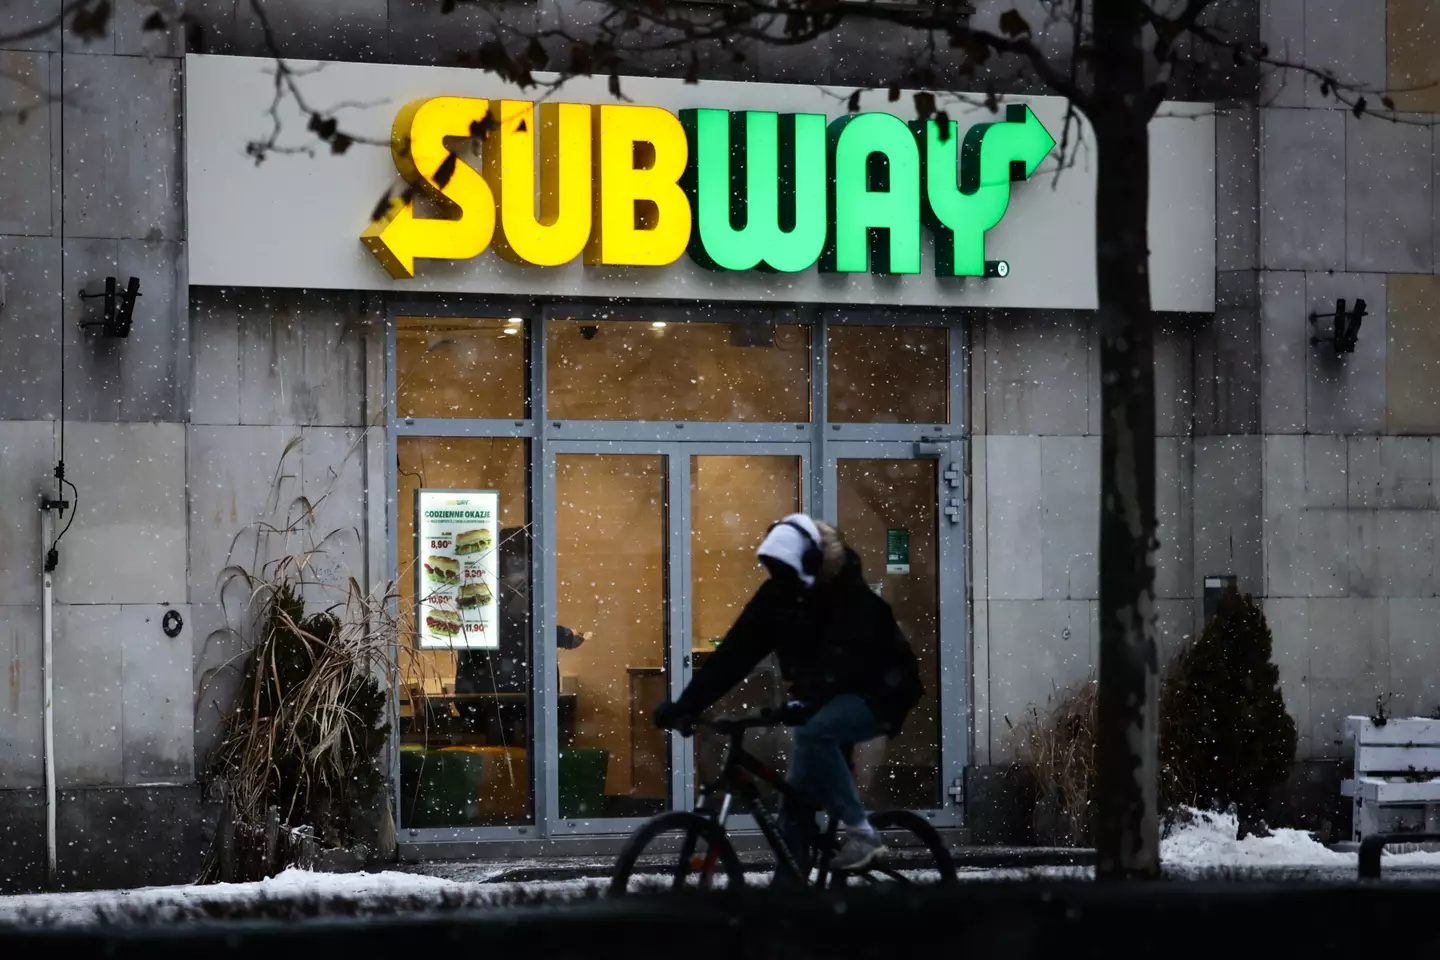 The Subway employee said she was hit in the stomach with the sandwich.